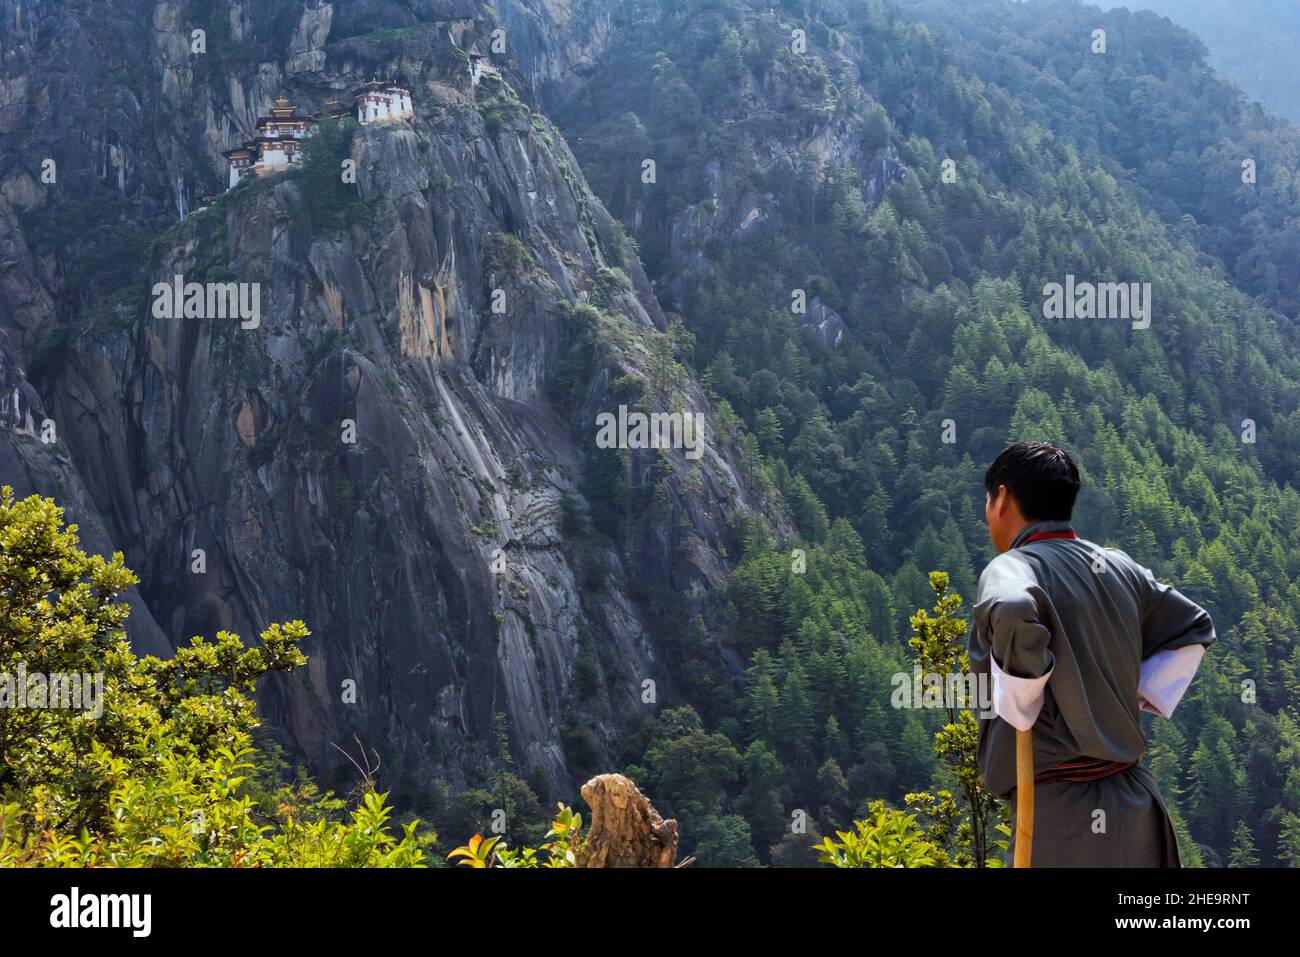 Bhutanese man watching Paro Taktsang (also known as Tiger's Nest) perched on the cliff, Paro, Bhutan Stock Photo